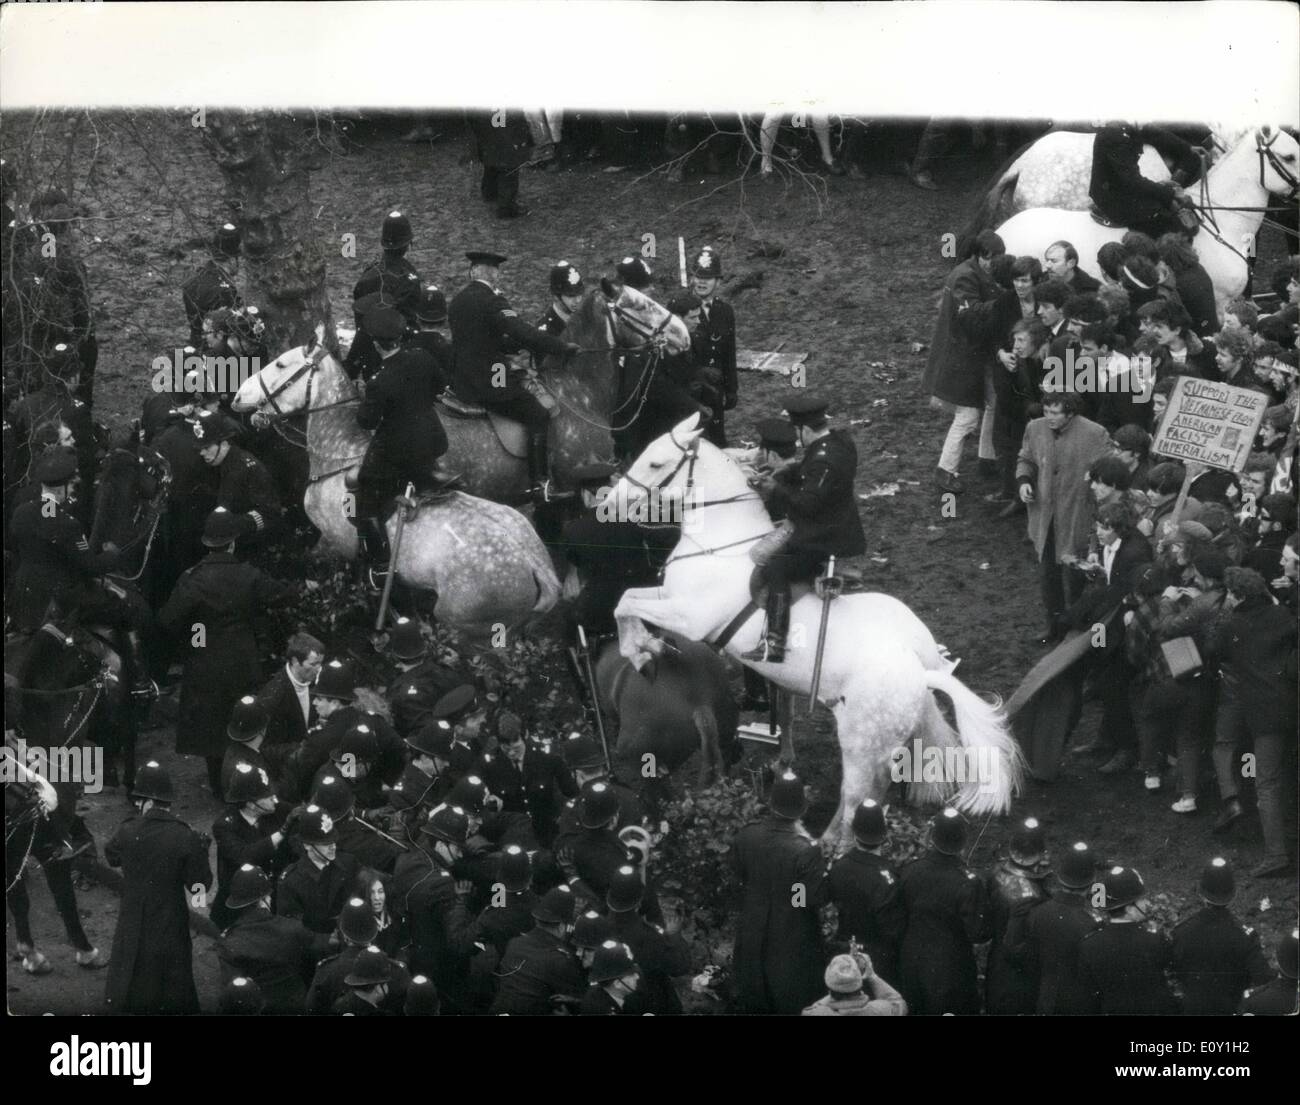 Mar. 03, 1968 - Anit-Vietnam war demonstration in Greensboro squared. photo shows A police horse rearing up after being hit by stones thrown by anti -Vietnam war demonstrators in Grosenor square, London. last night. Stock Photo